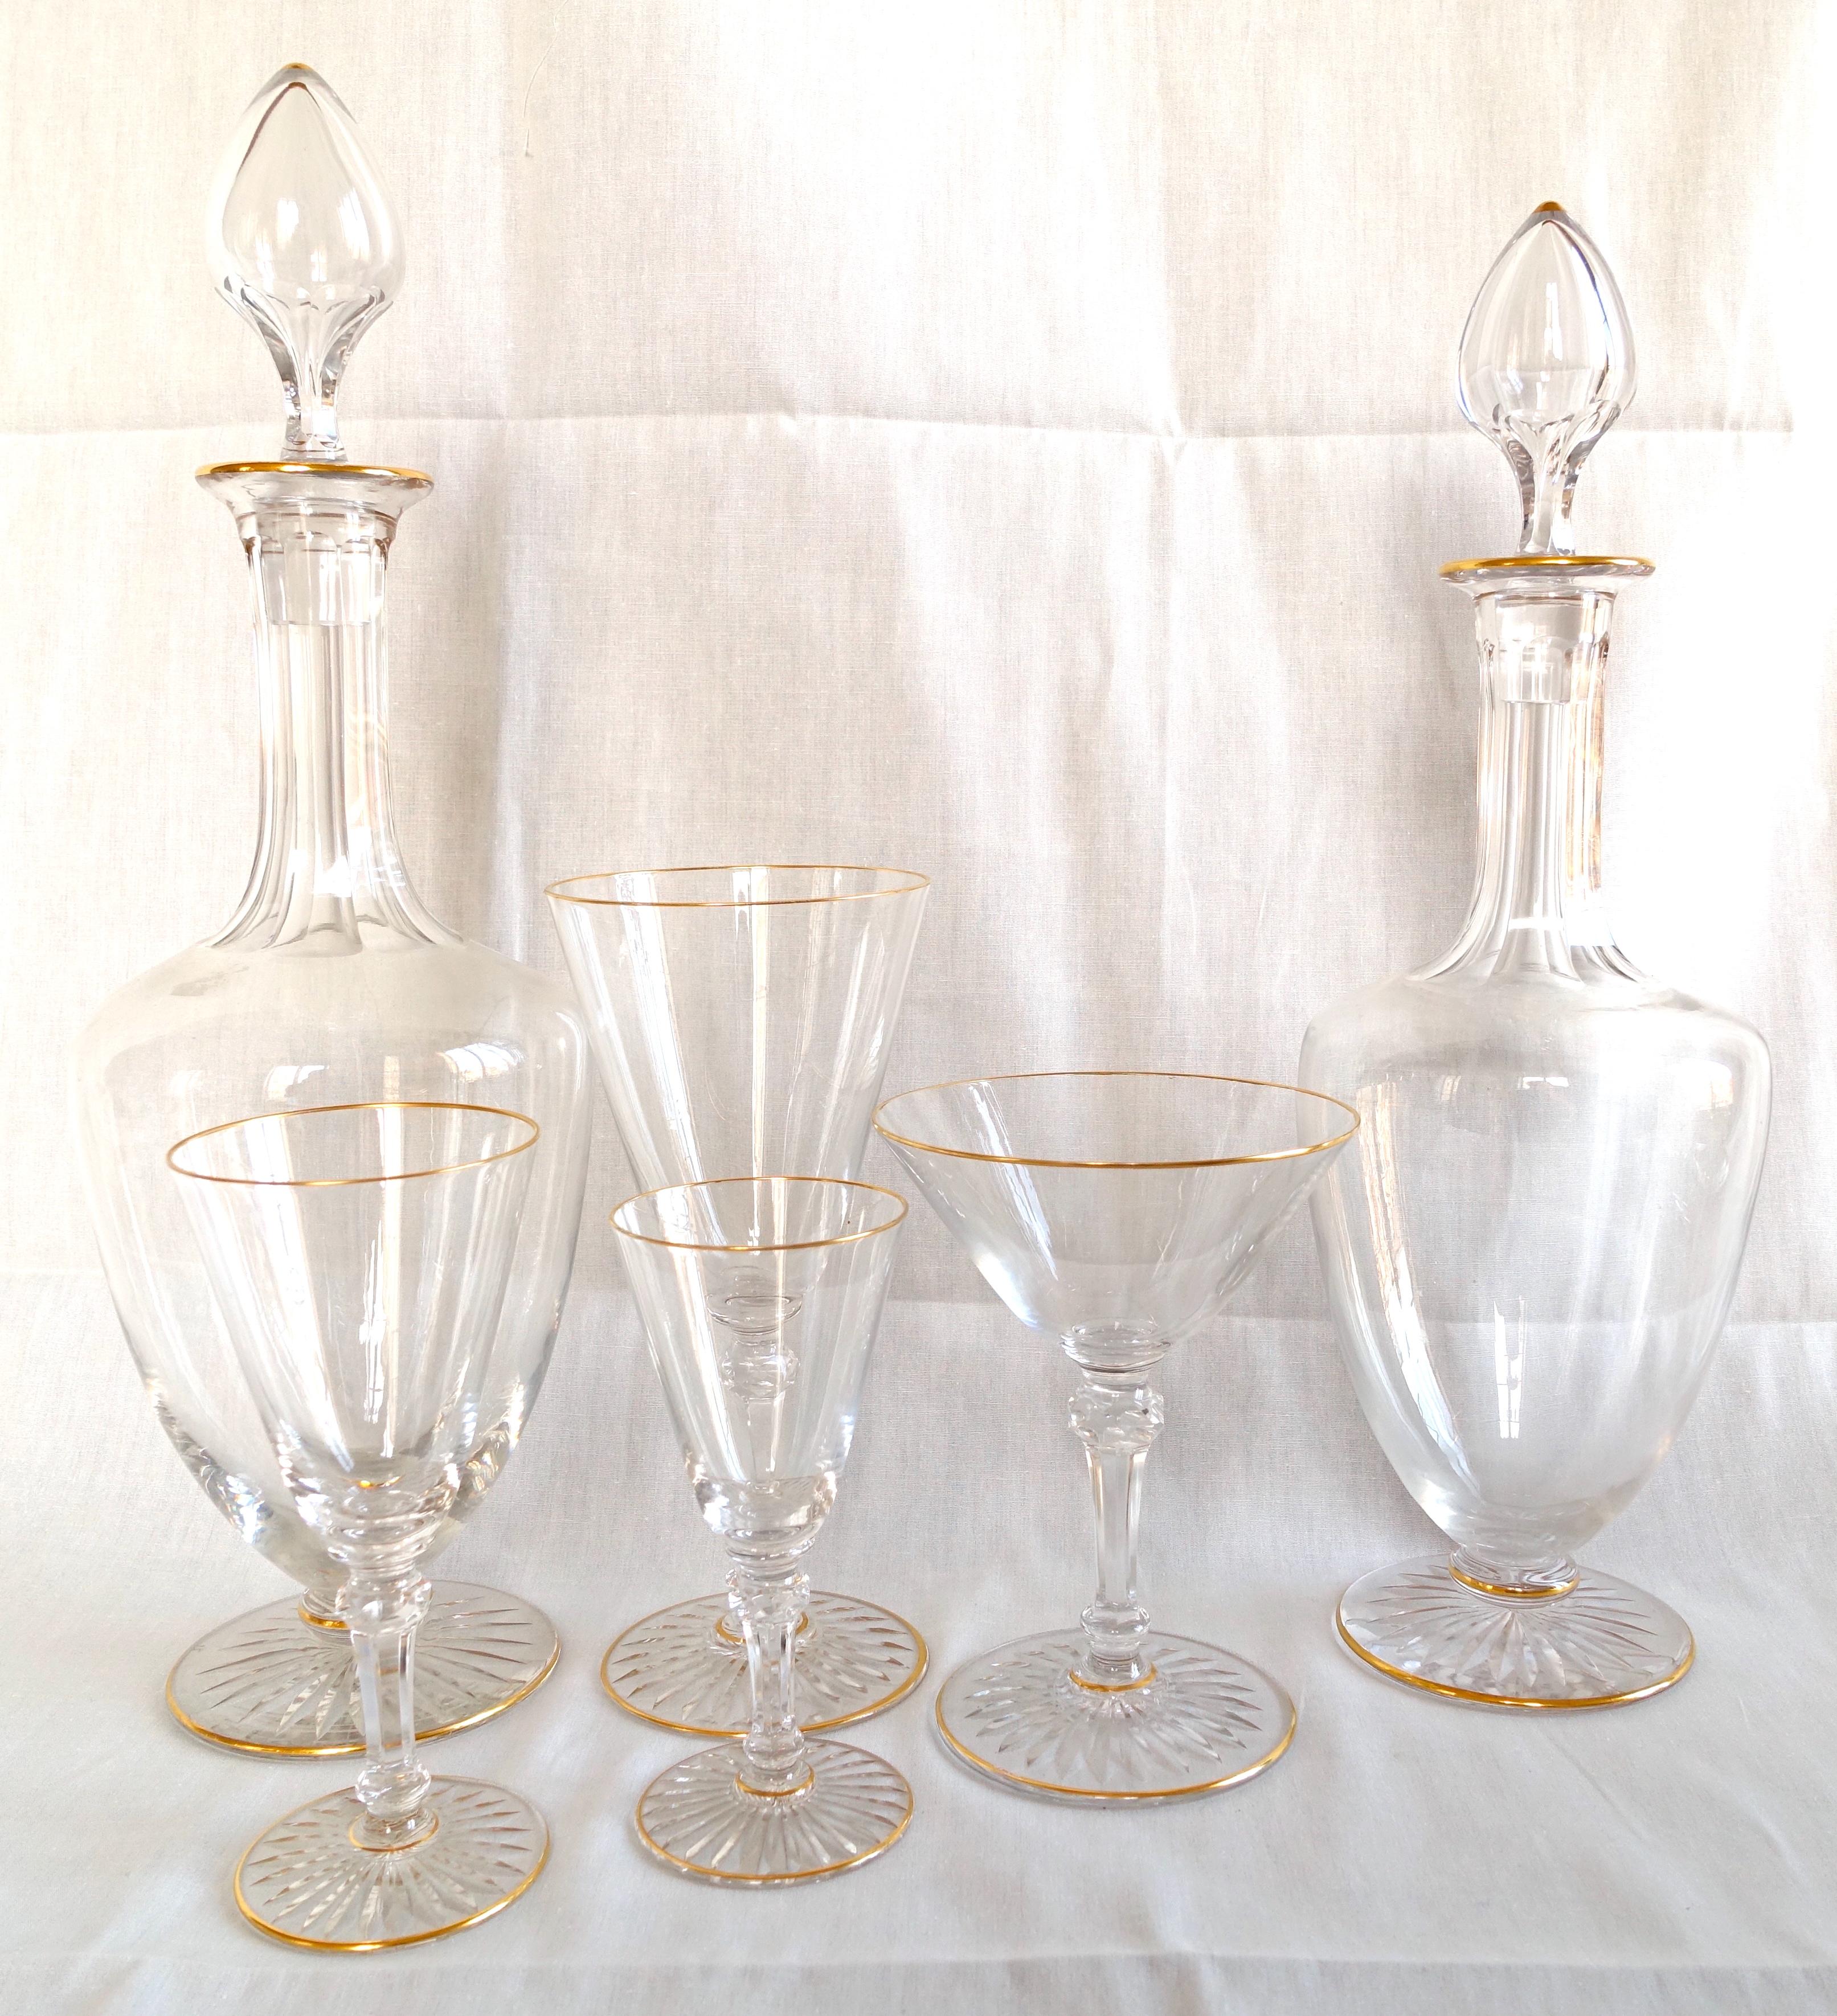 Baccarat crystal champagne glass - fine gold gilt - early 20th century 1